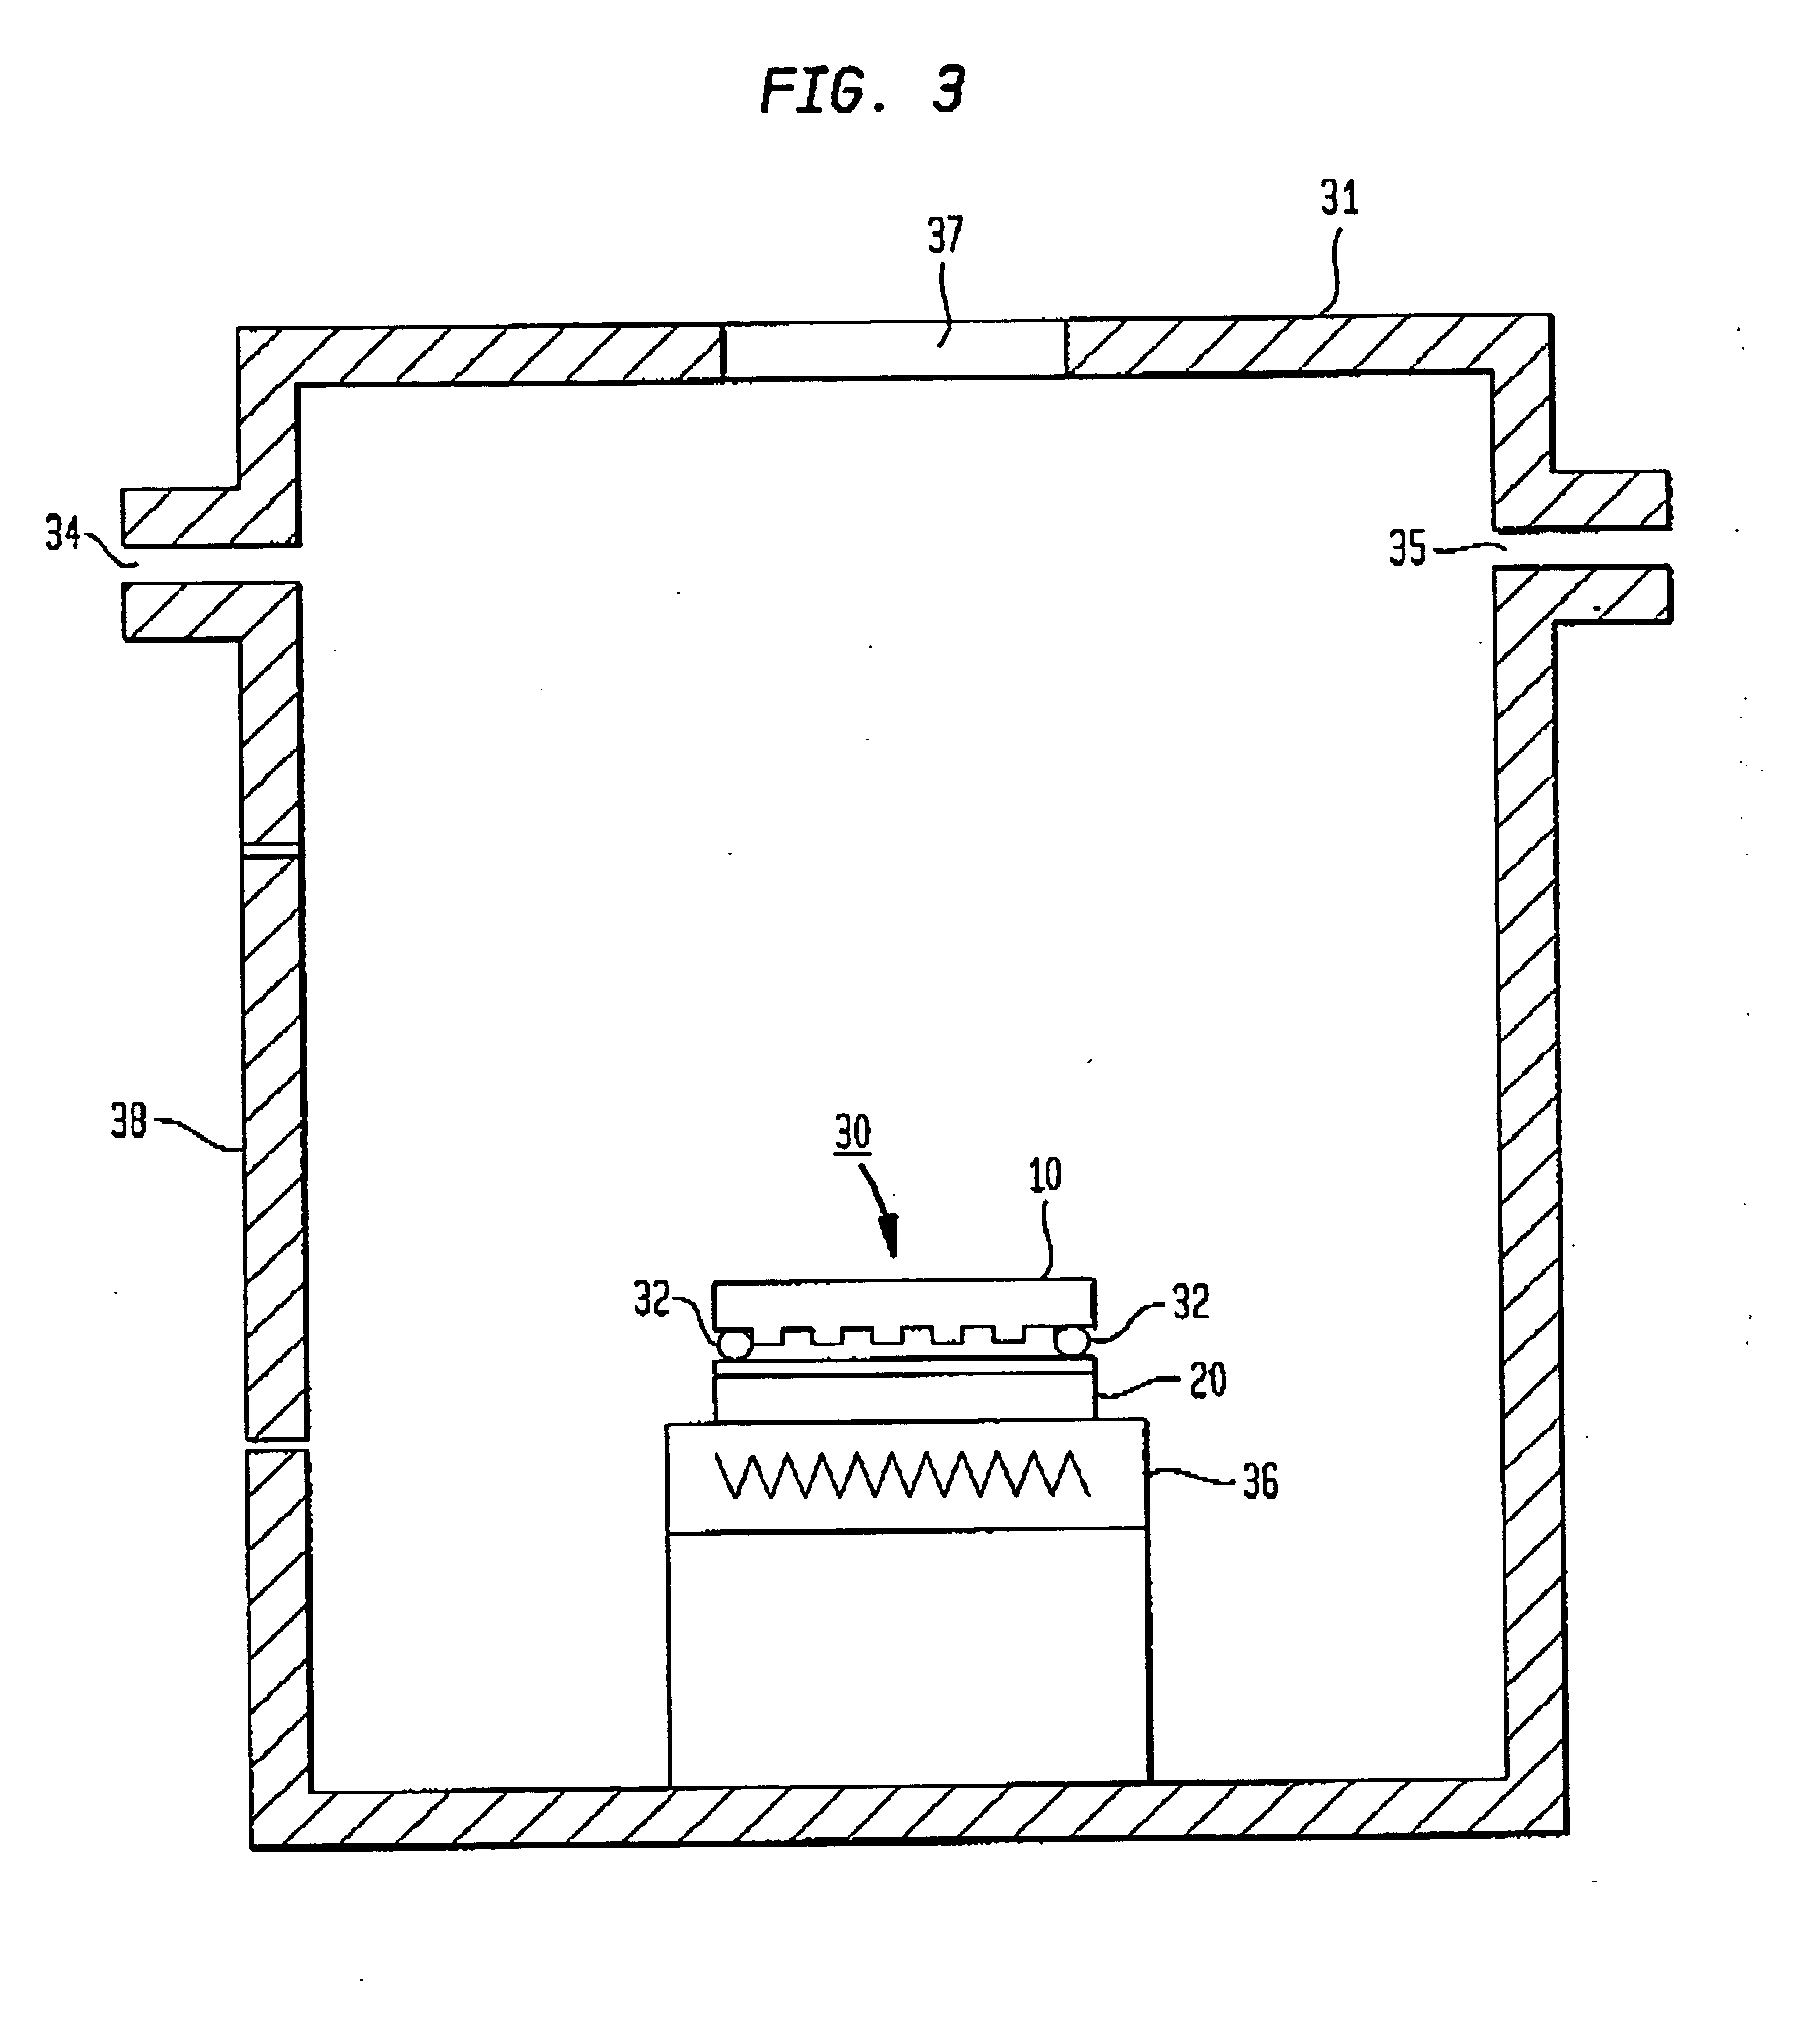 Apparatus for fluid pressure imprint lithography